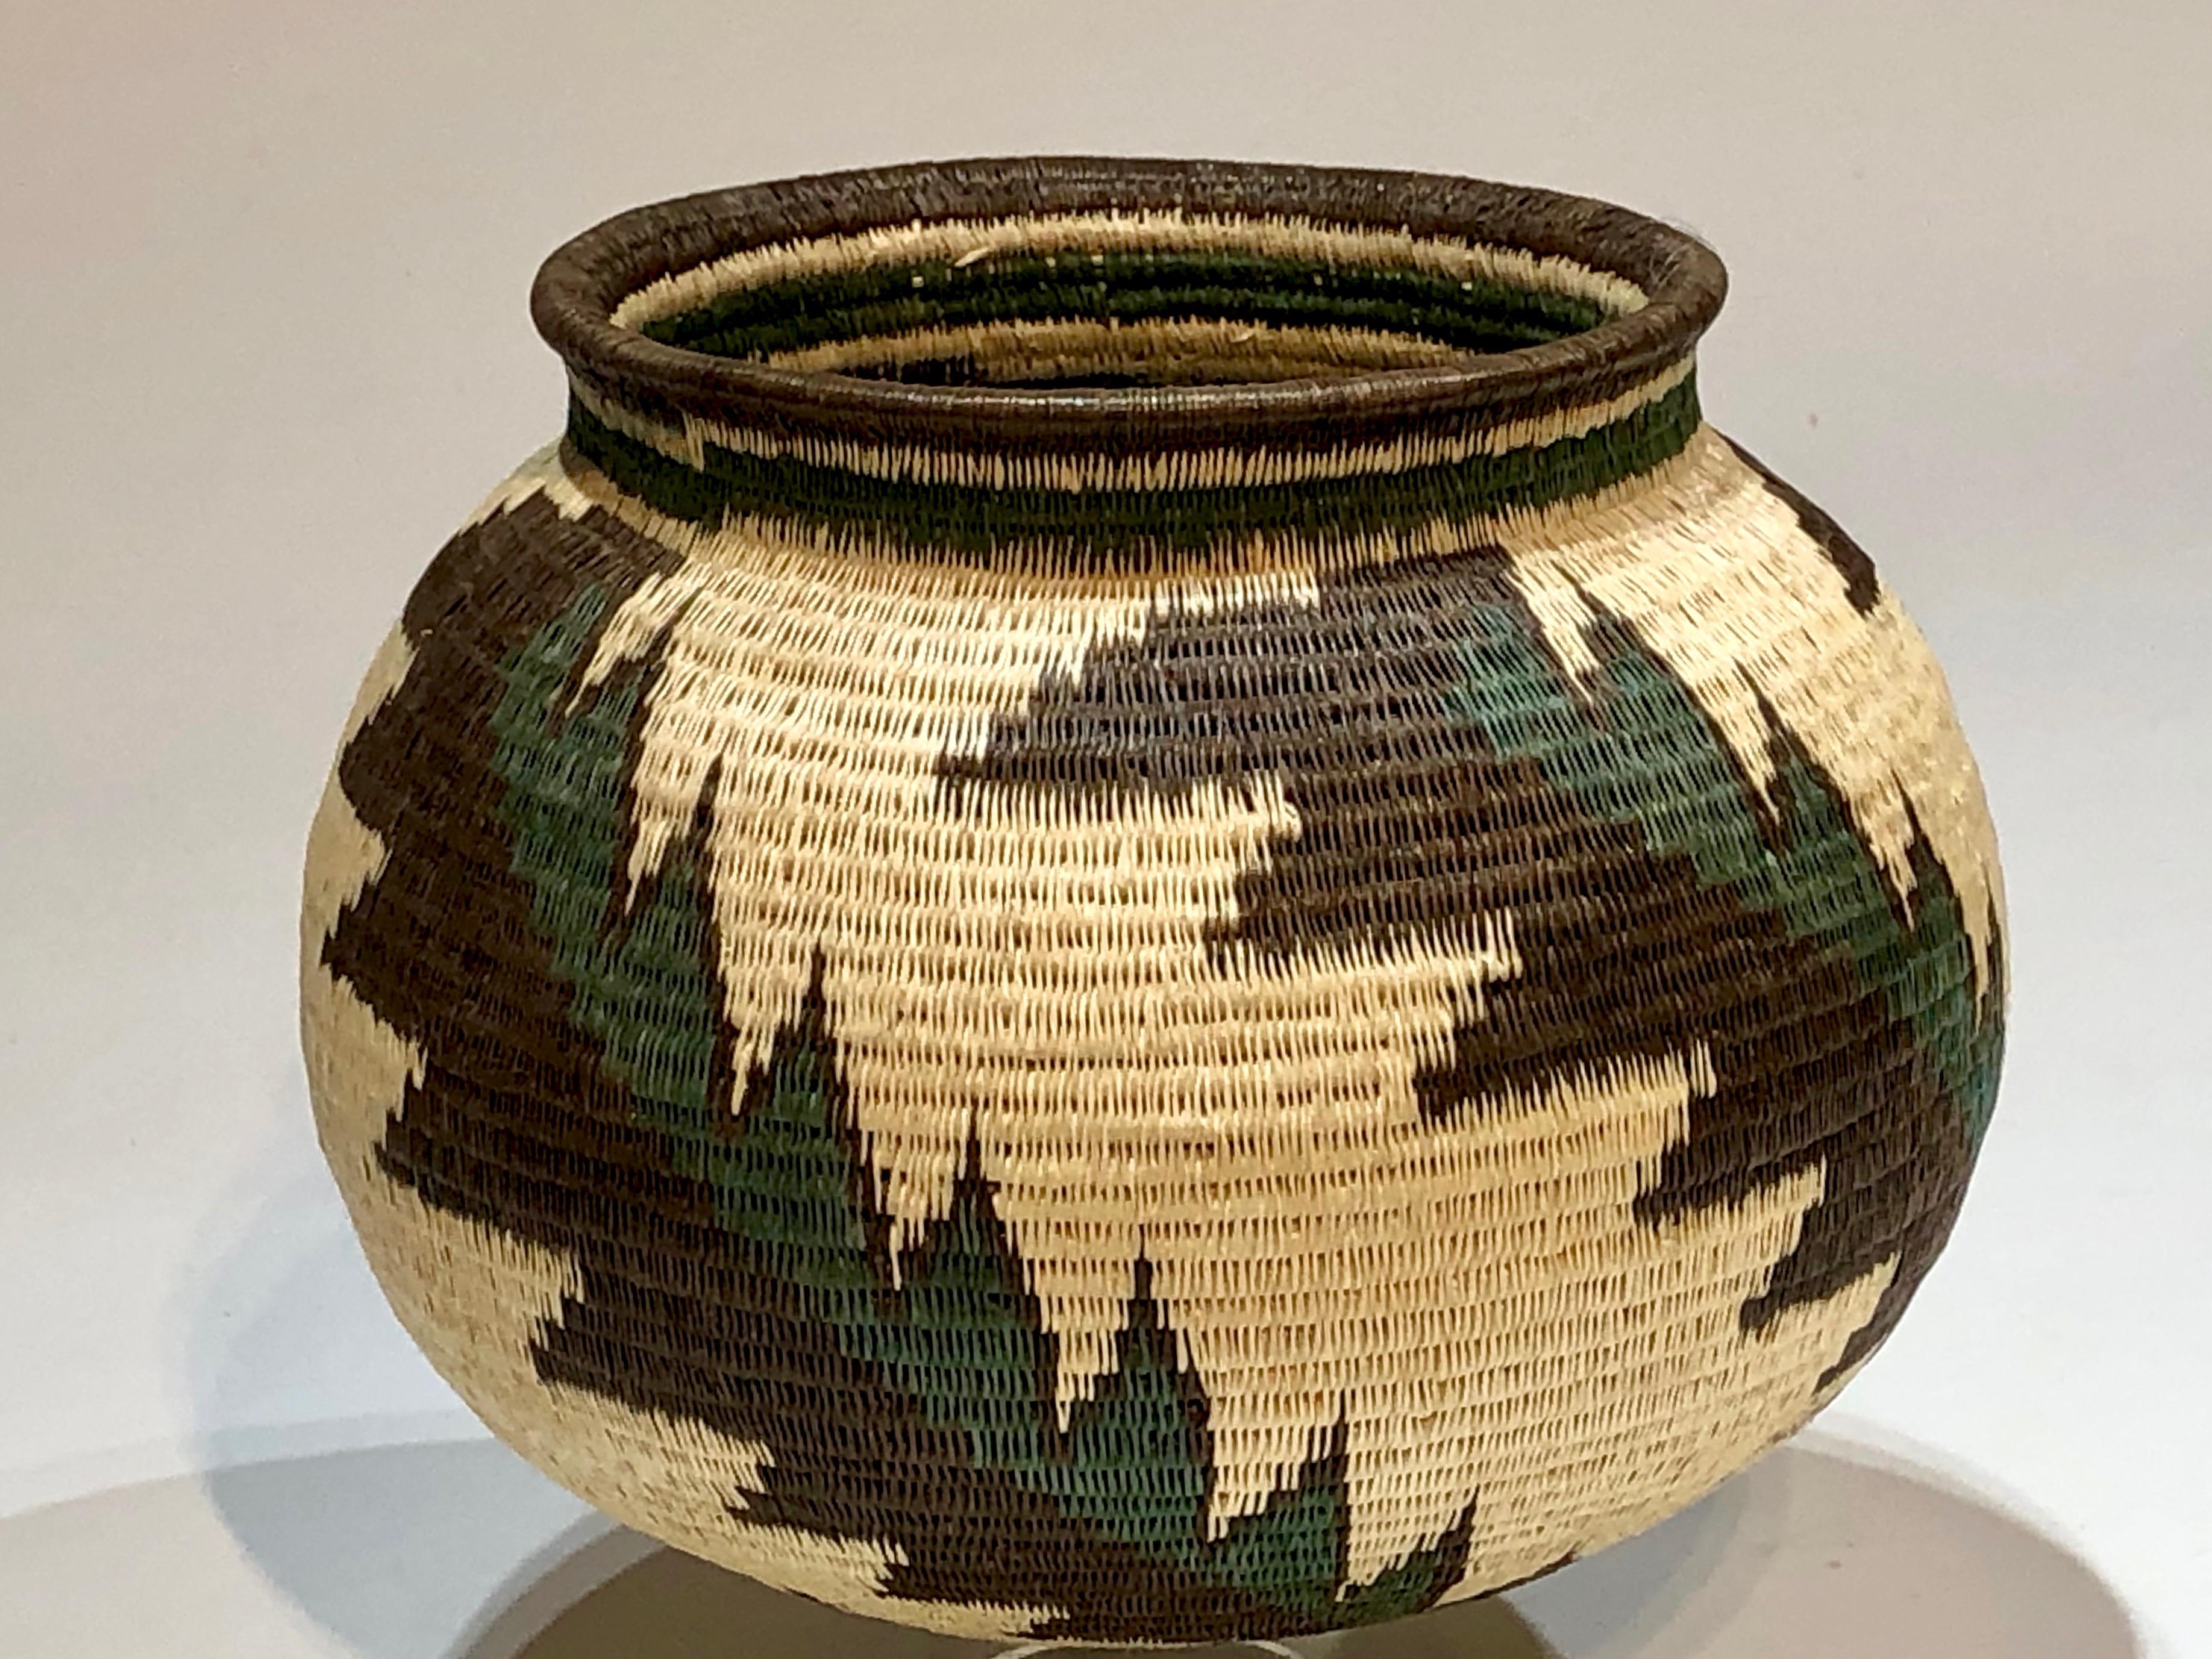 Wounaan Tribe Panama Rainforest Basket, green, white, black, feather design - Mixed Media Art by Unknown